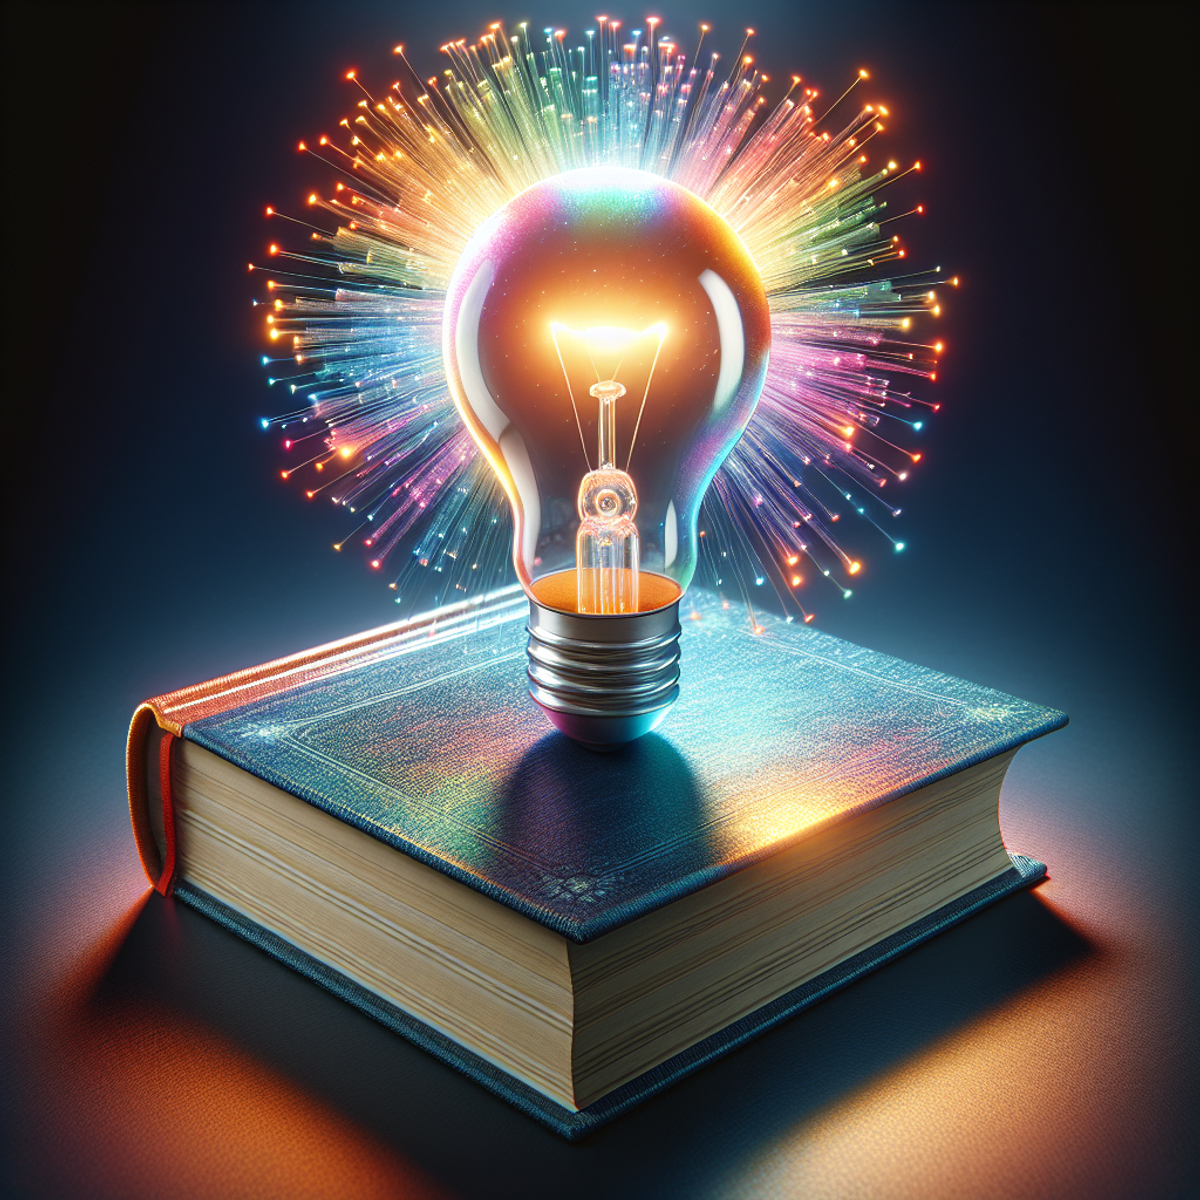 A brightly colored book with a glowing light bulb perched on top, emitting a warm, iridescent glow.